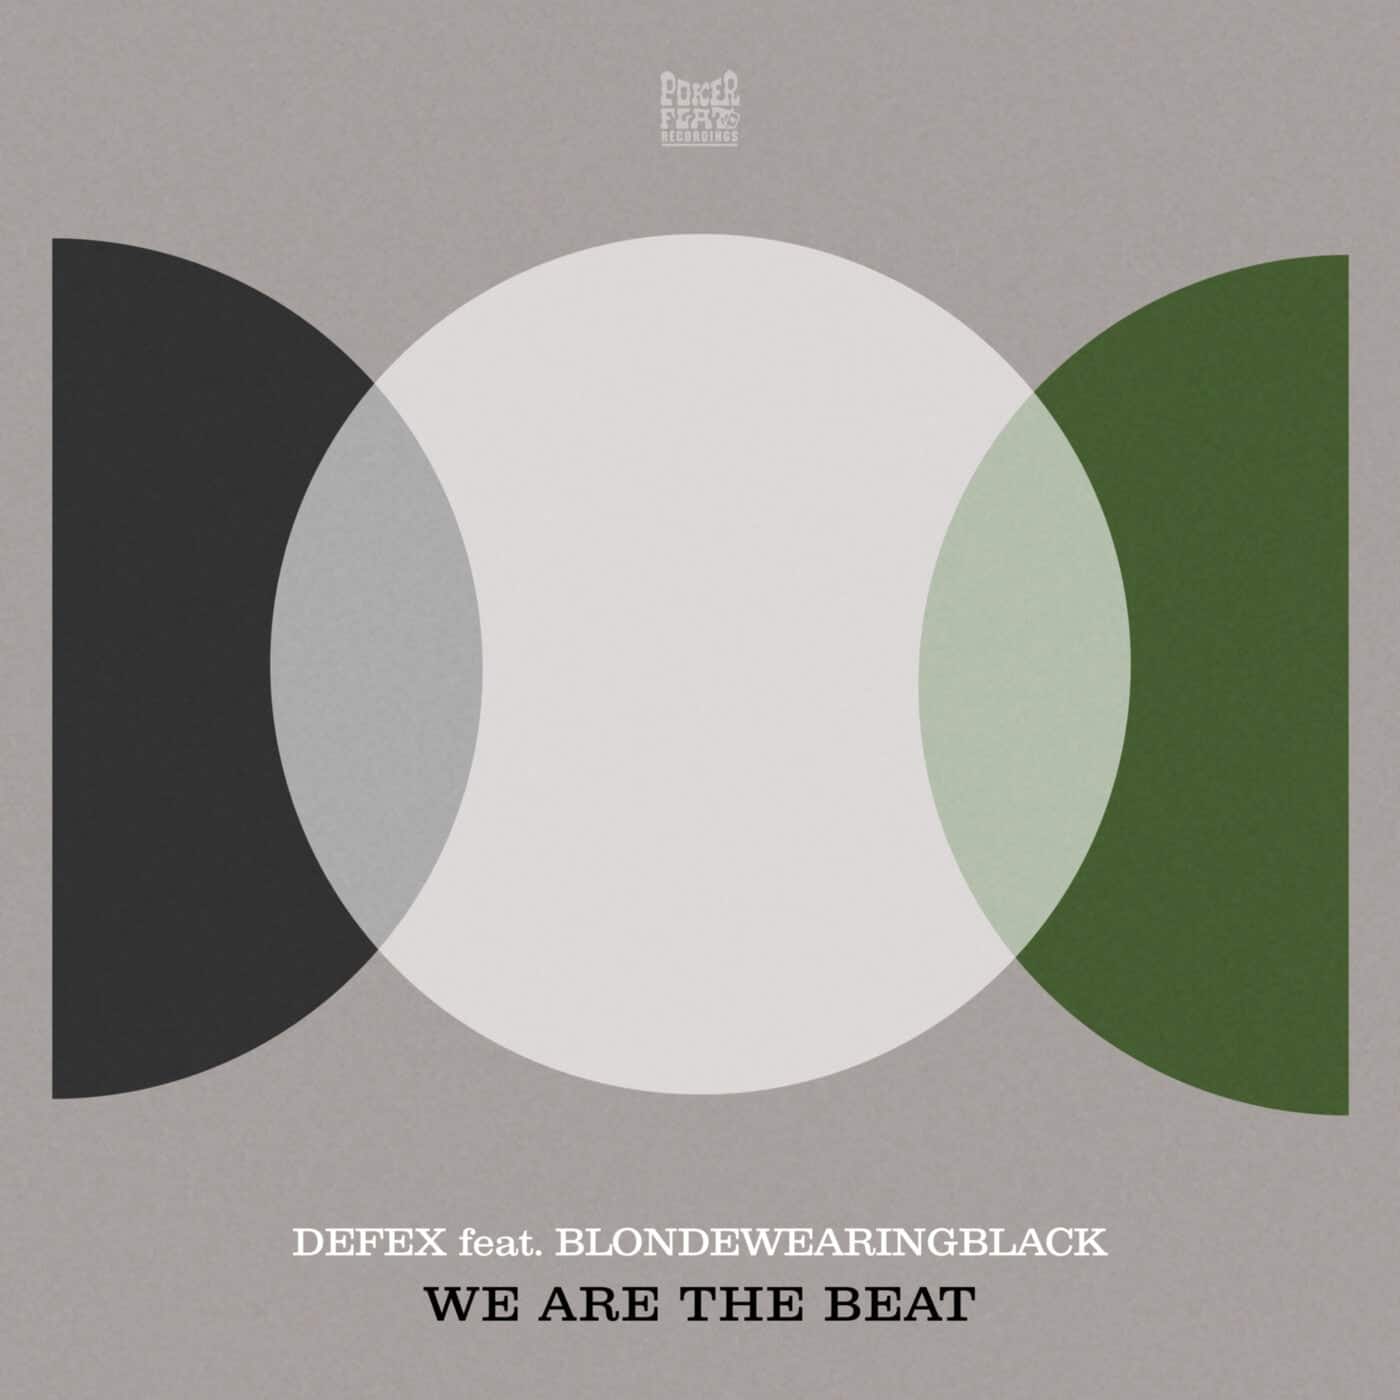 image cover: Defex, blondewearingblack - We Are The Beat / PFR251DS